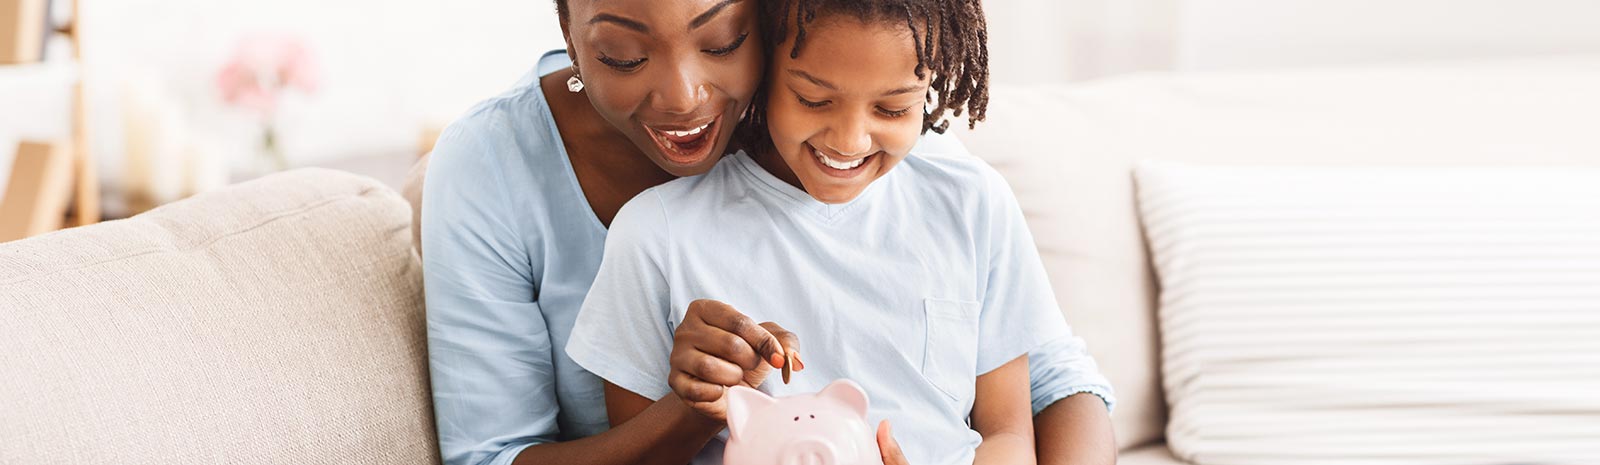 Woman and child putting money into a piggy bank.